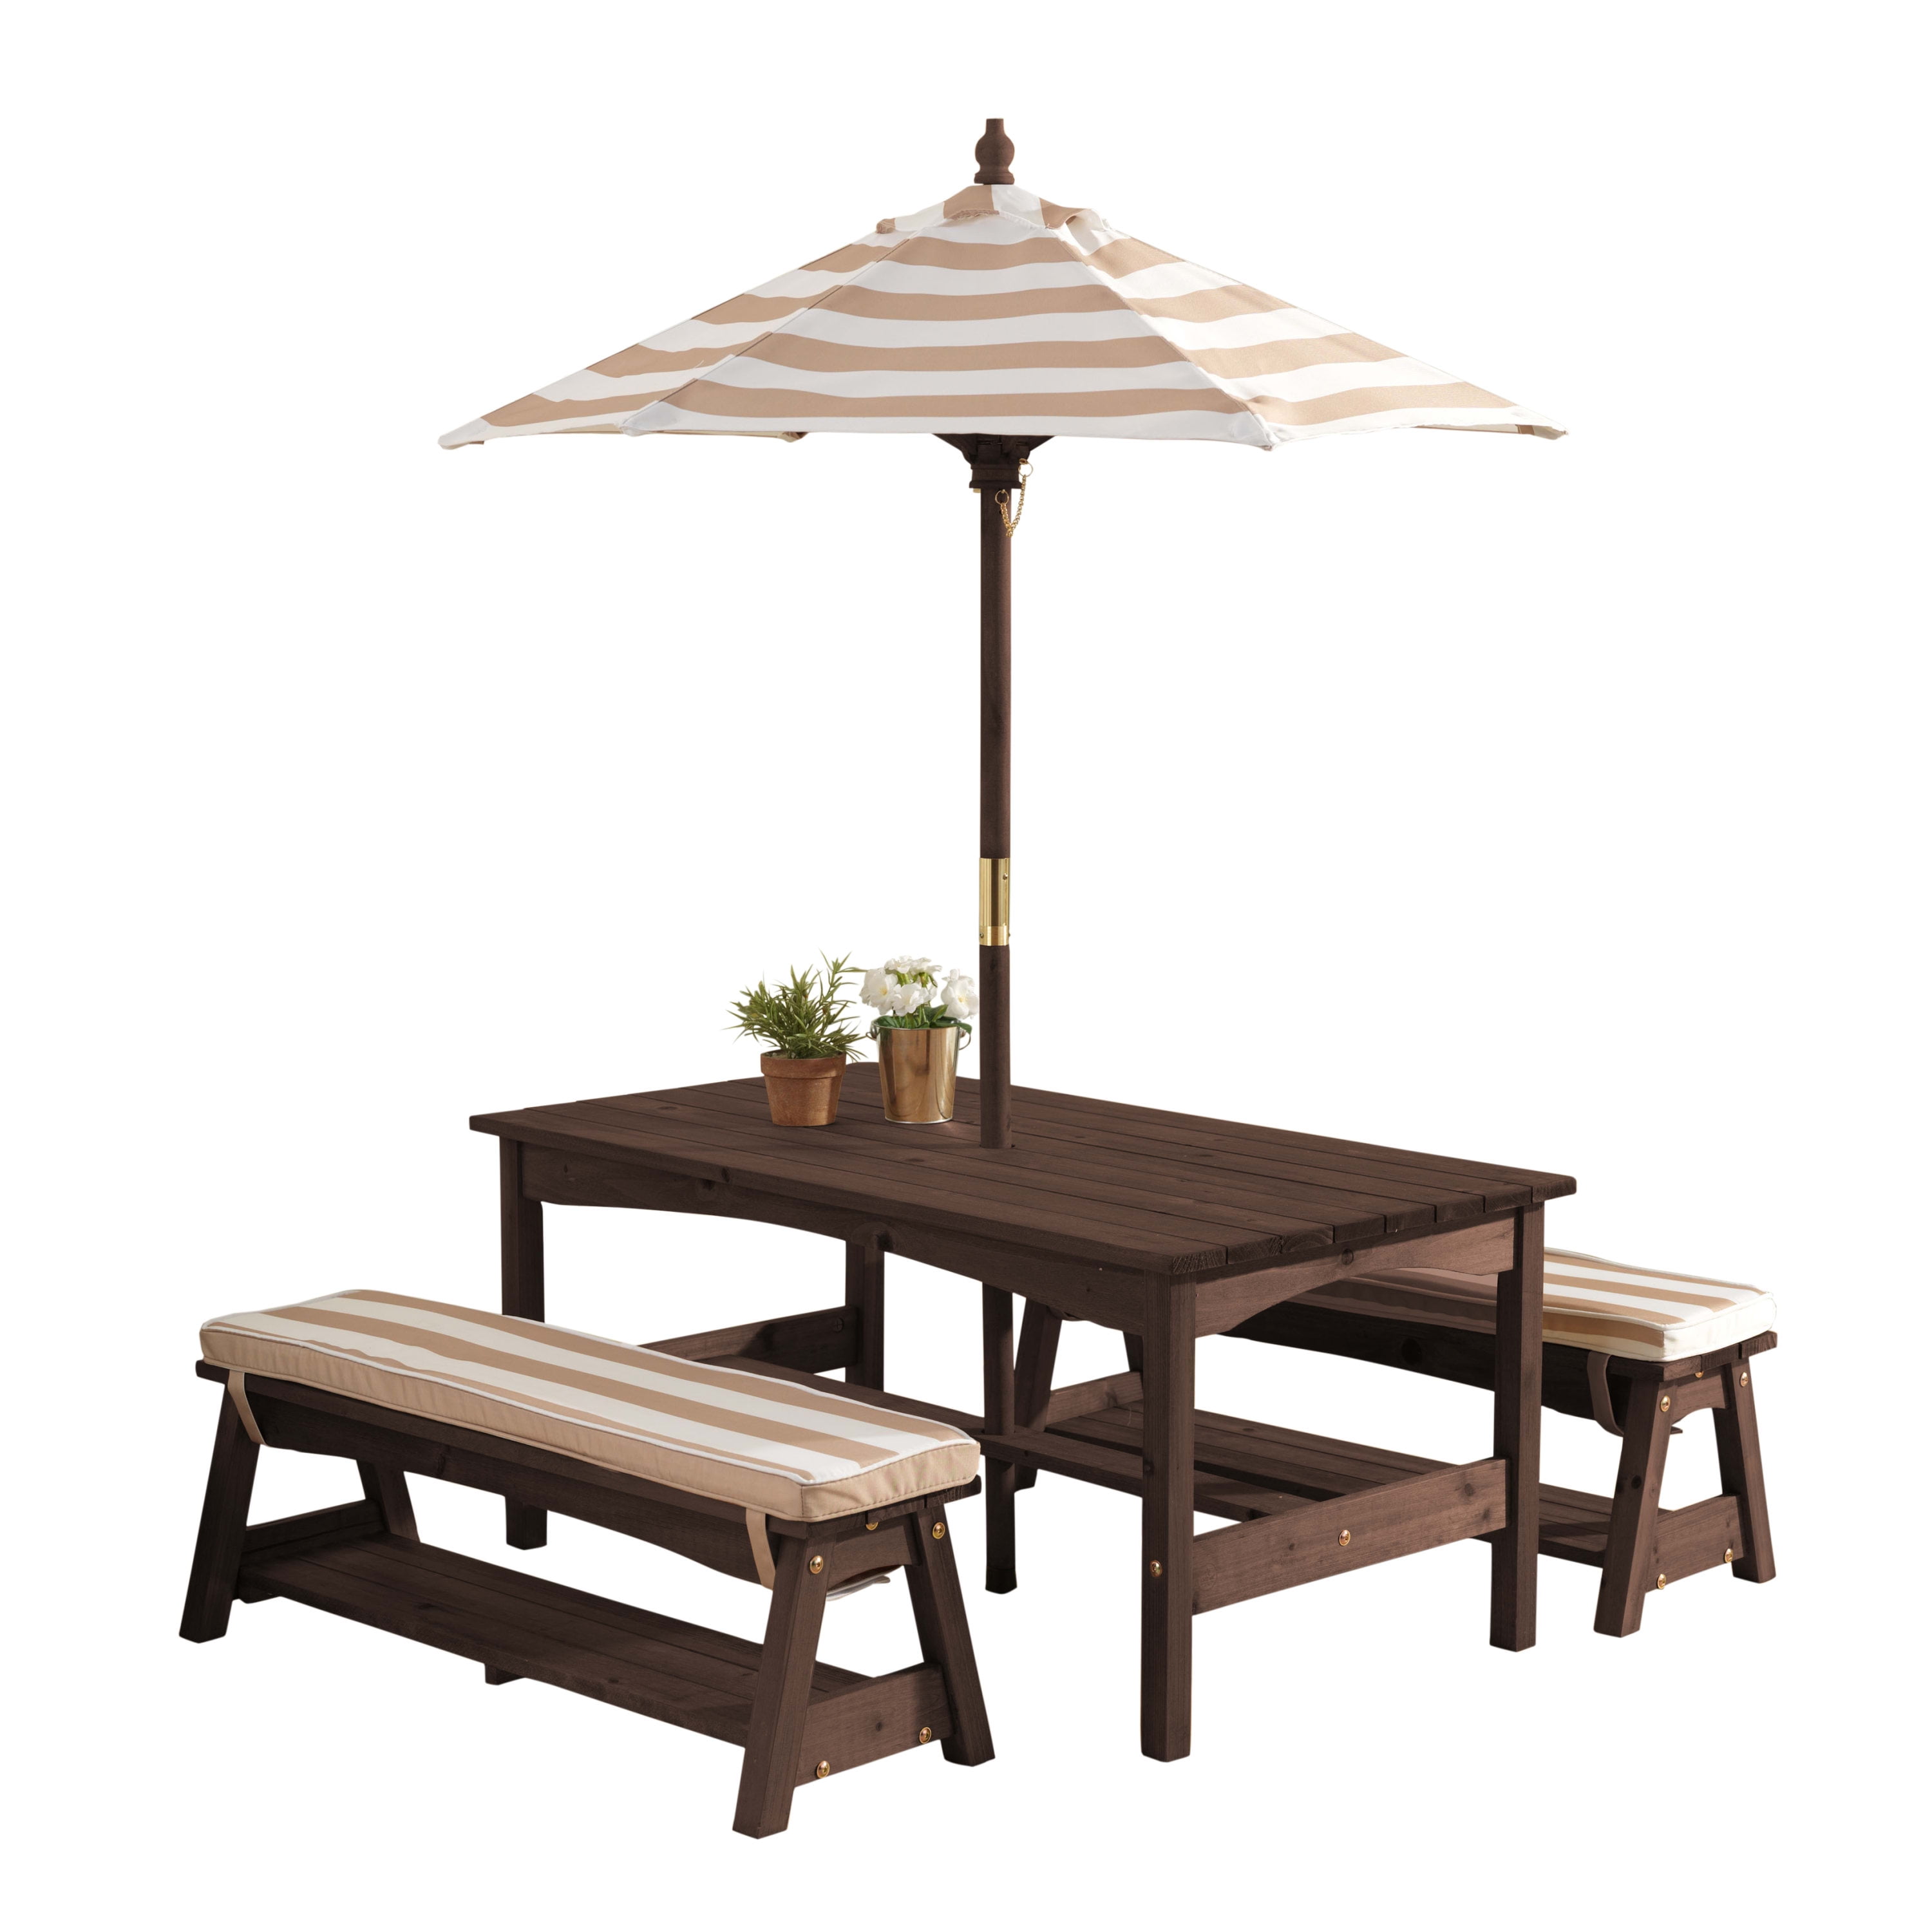 KidKraft KidKraft Outdoor Wooden Table & Bench with Cushions and Umbrella, Espresso